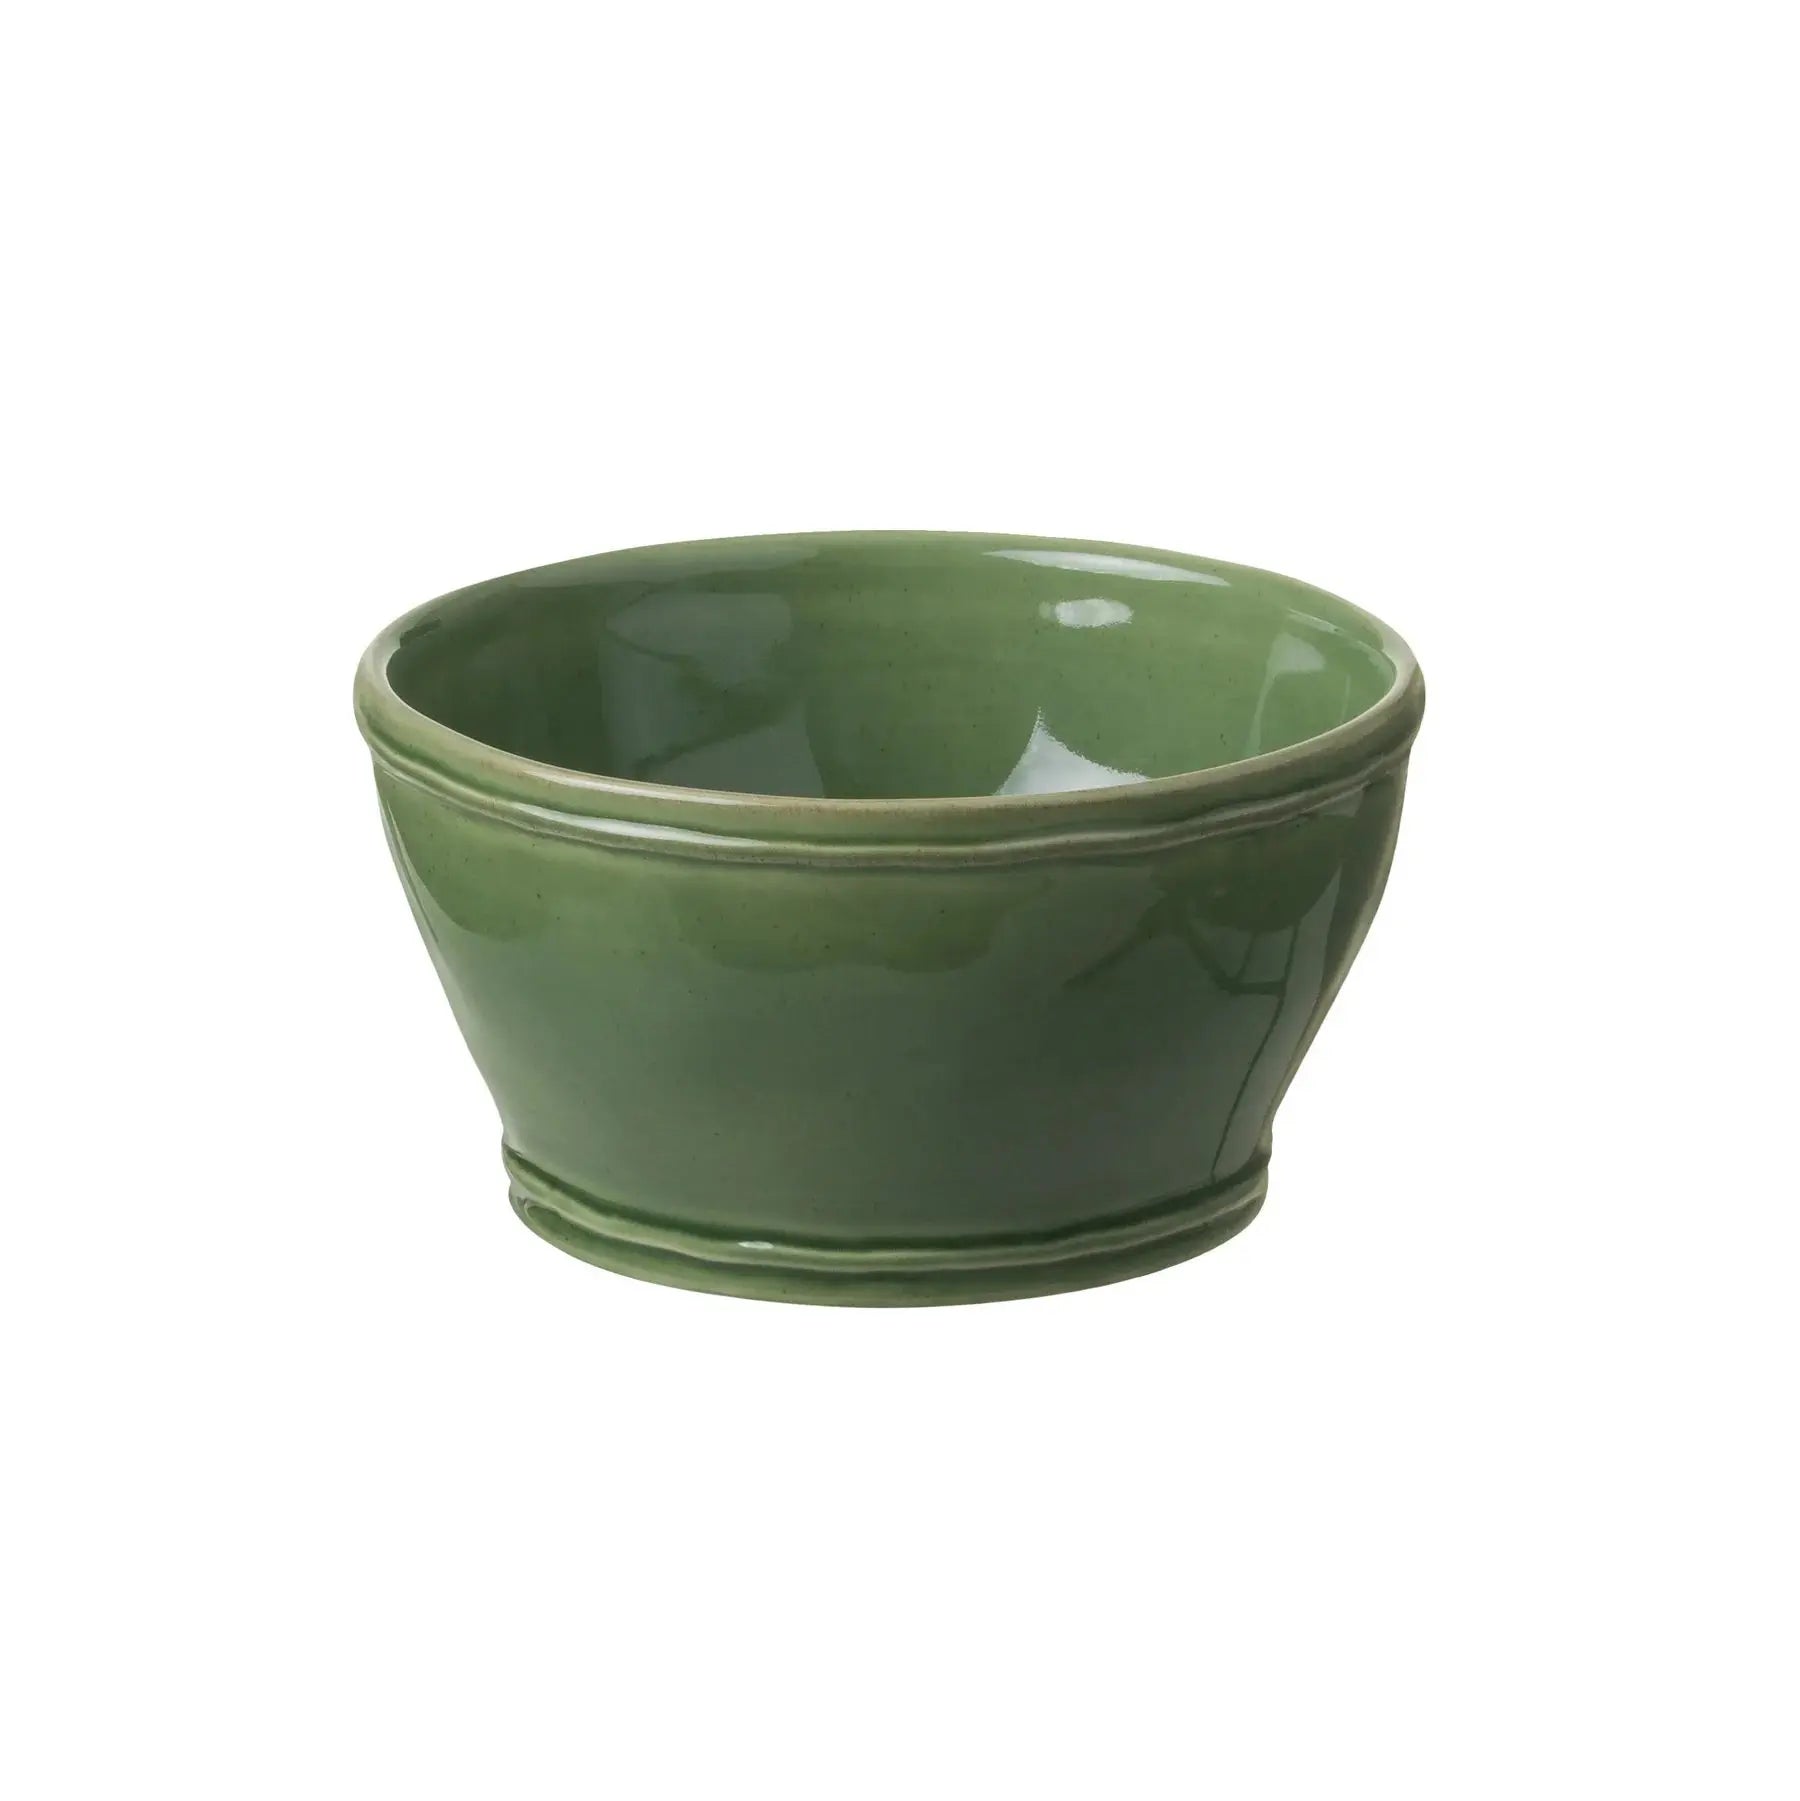 Casafina Fontana Soup Cereal Bowl in Green